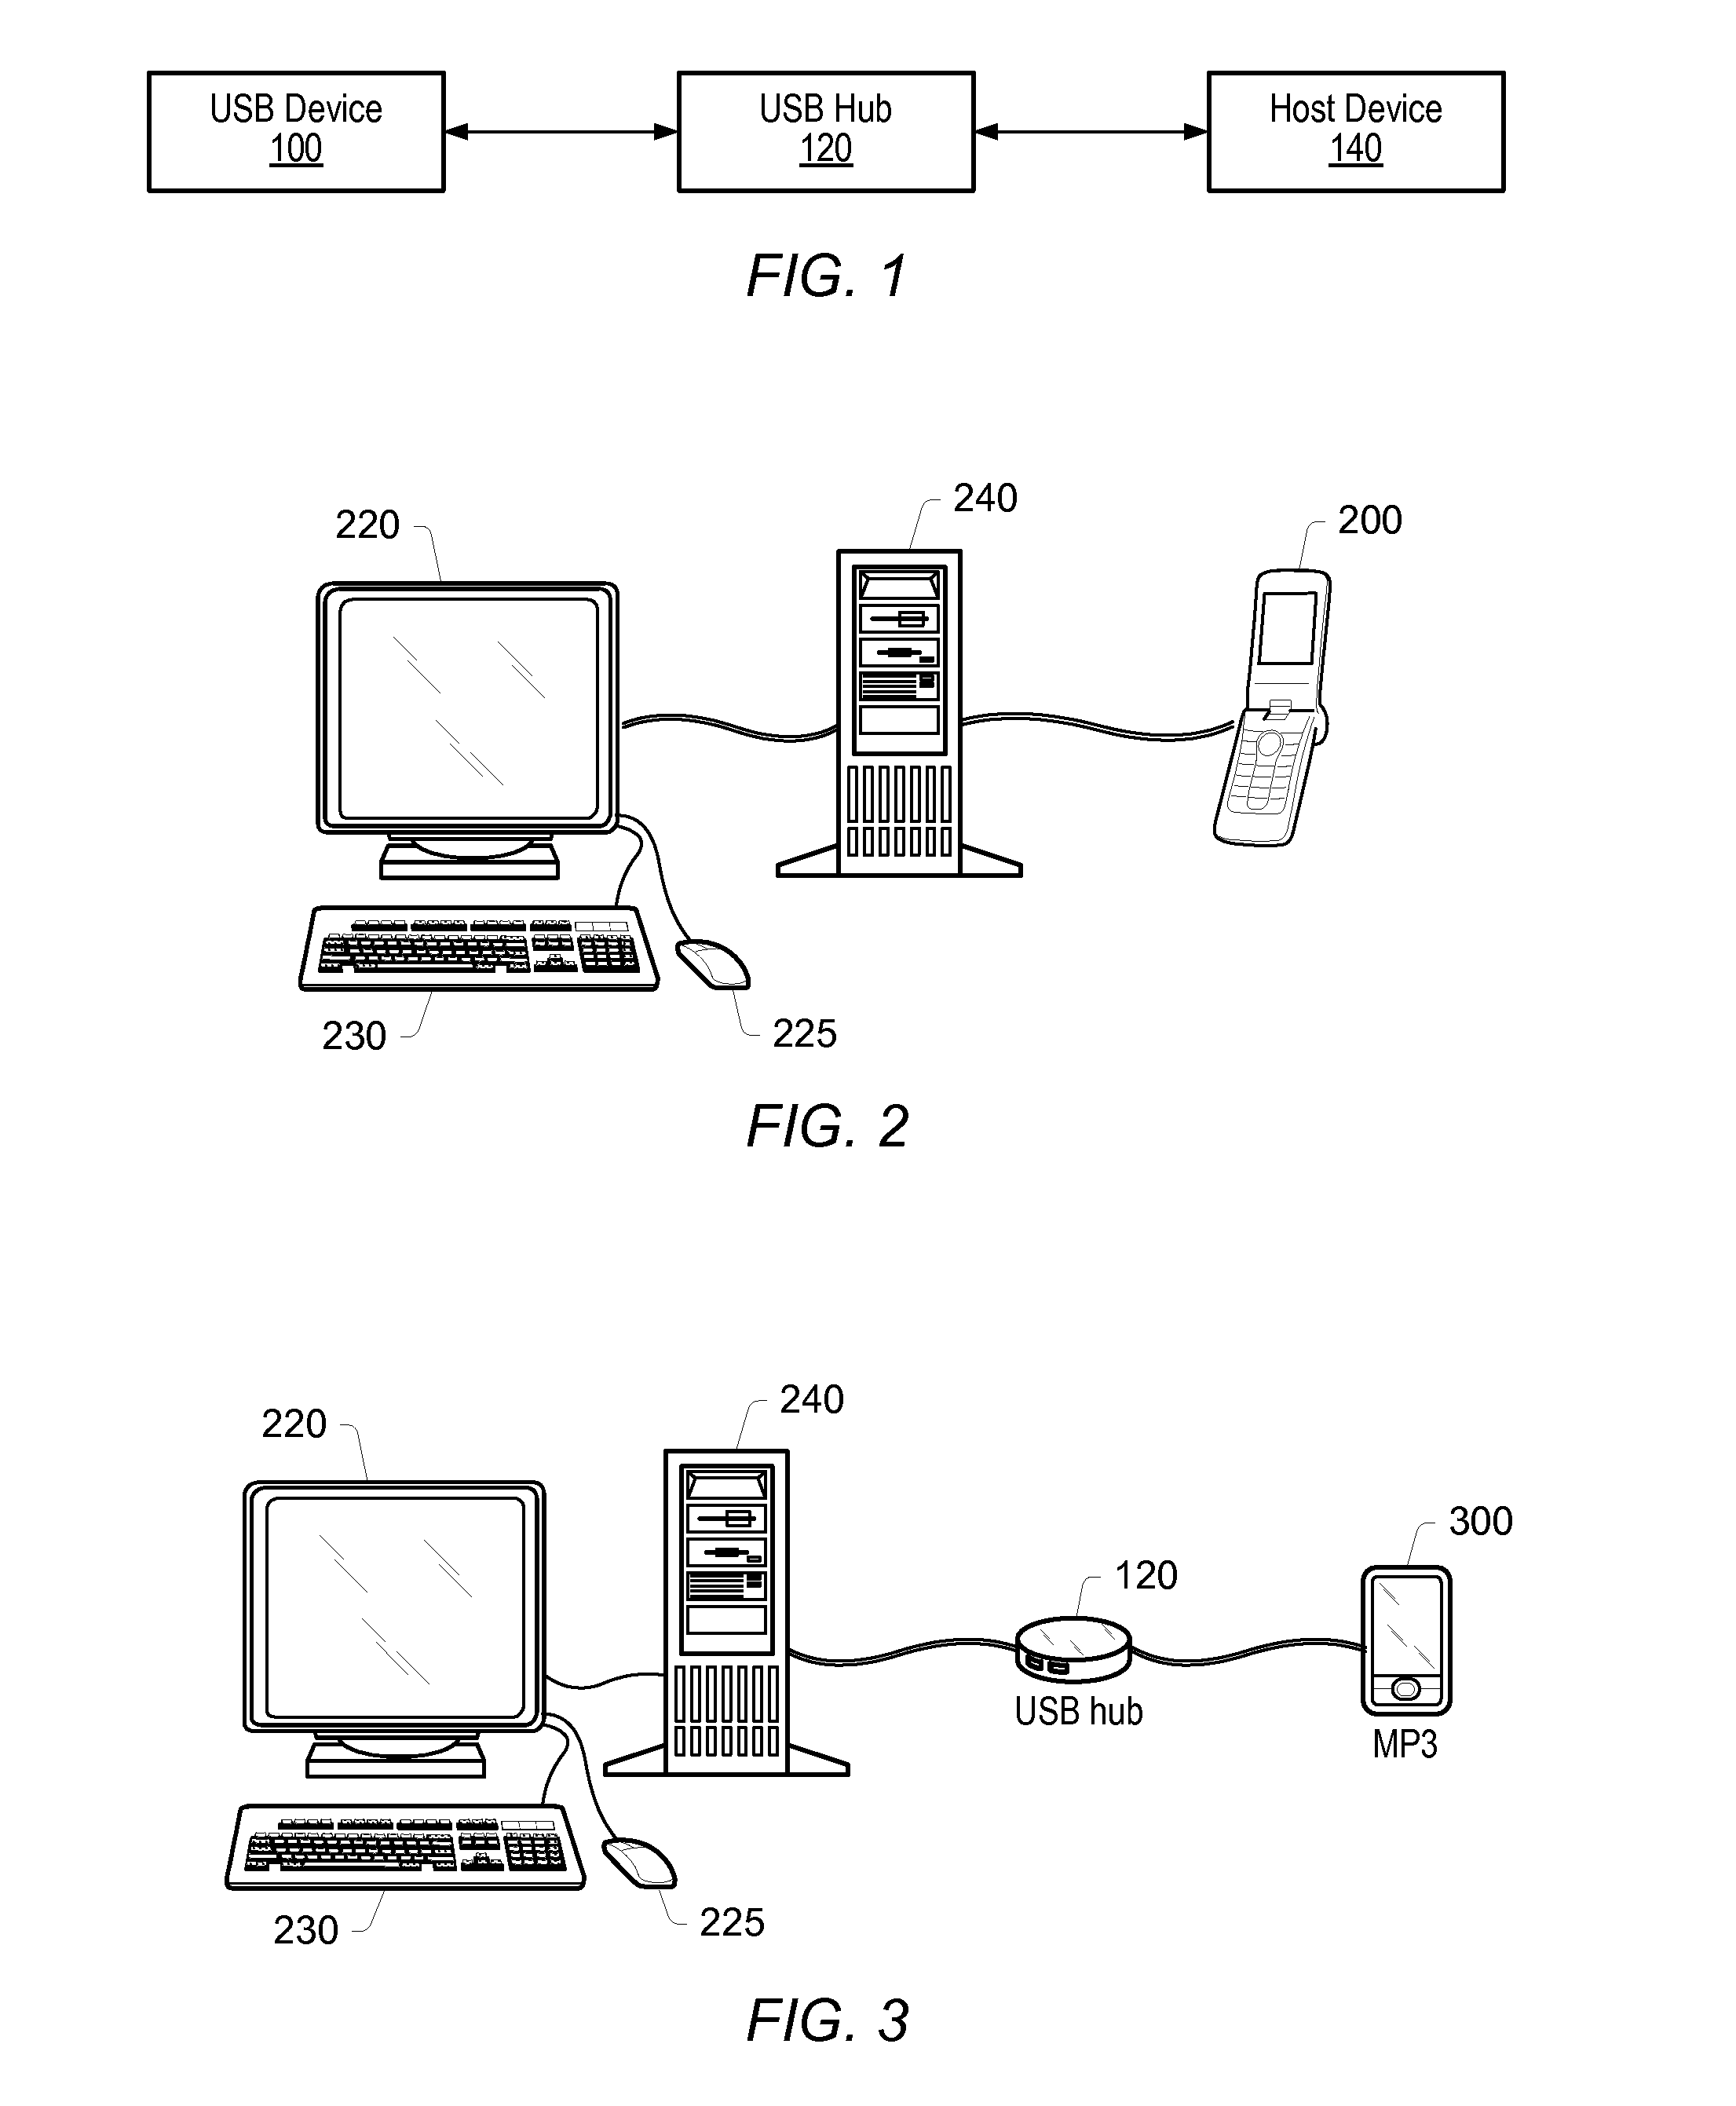 System and Method for Enumerating a USB Device Using Low Power